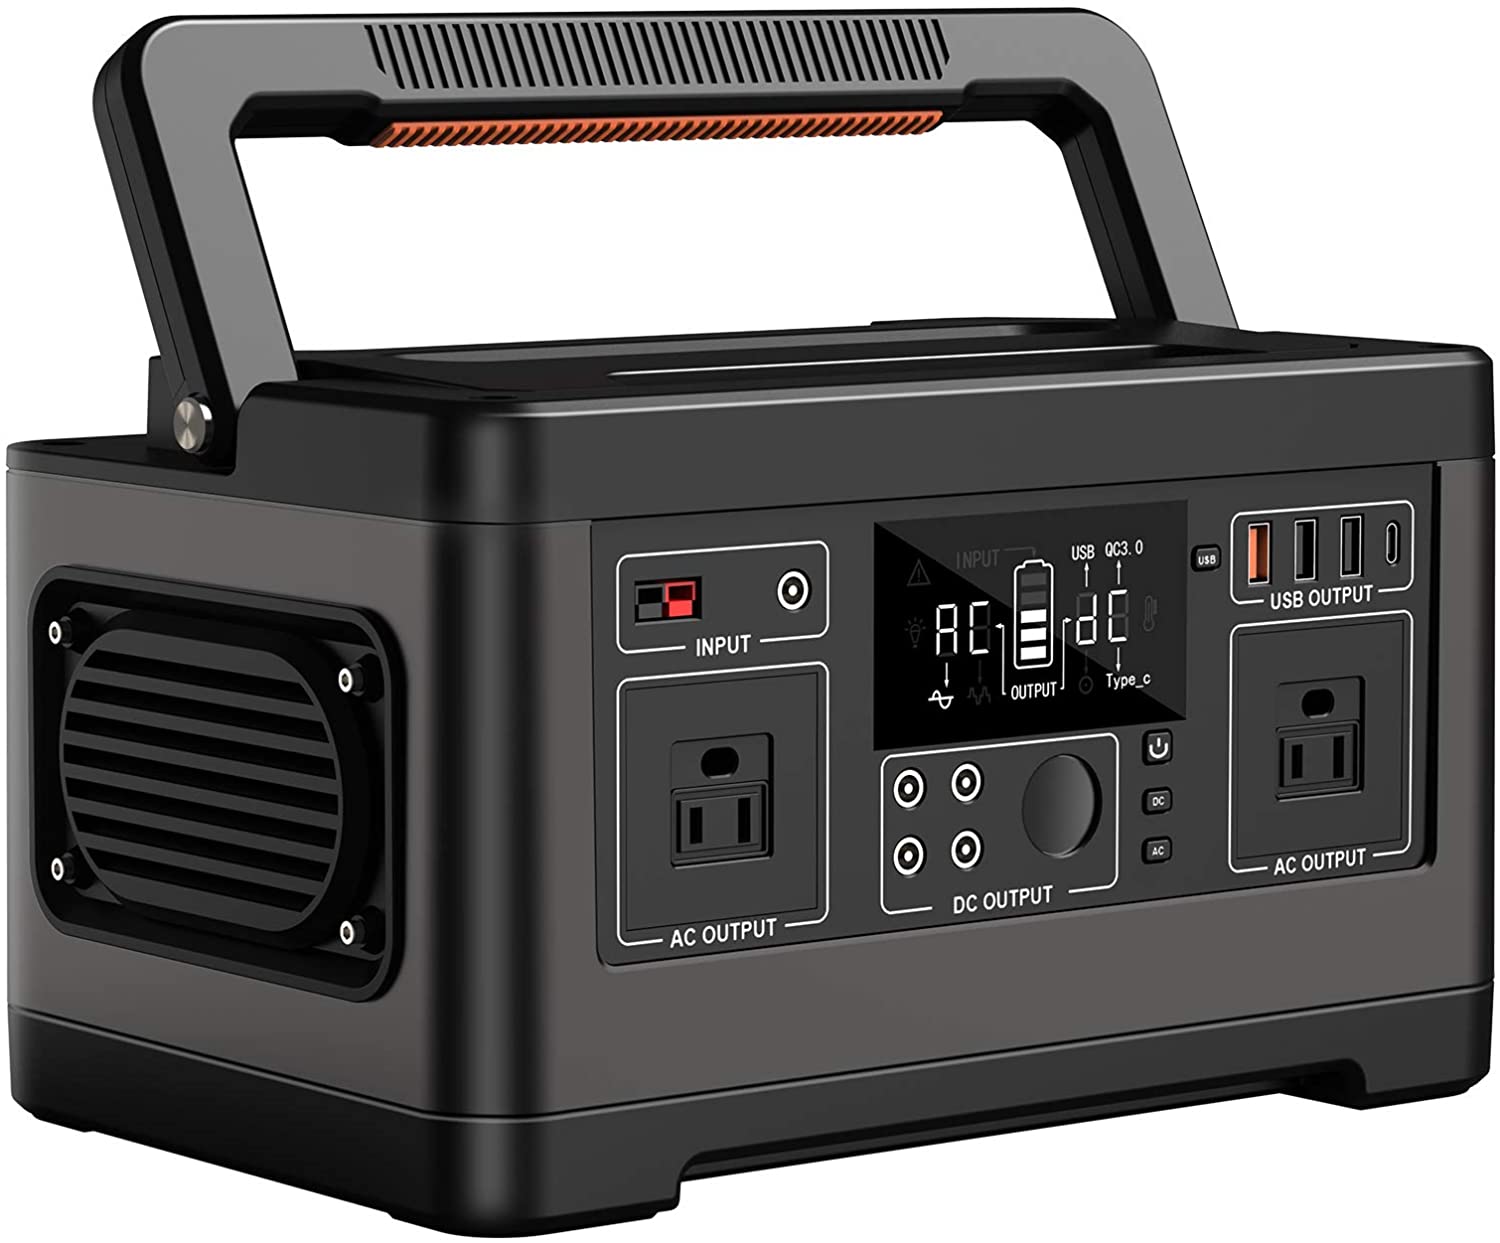 Portable Generator Power Station 500, 110V/520Wh 3 Charging ways & 9 Outlets, LED Display & Flashlight, Mobile Solar Generator (Solar Panel Optional), for CAPA Outdoors Camping Travel Emergency